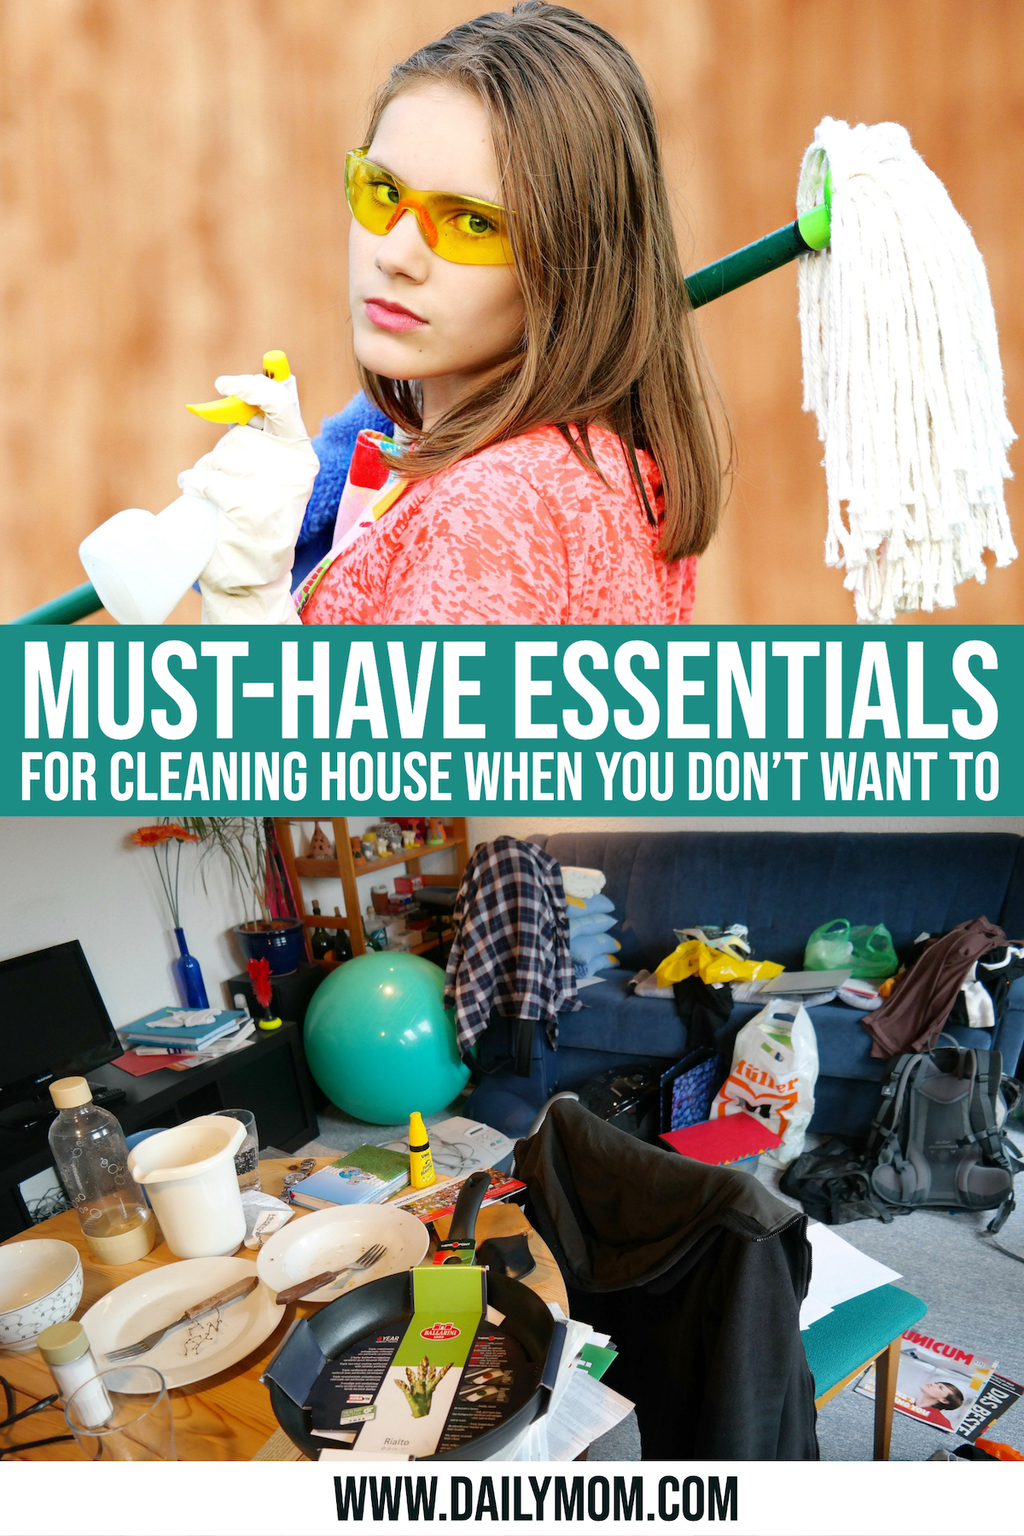 Got Horrible Home Cleaning Habits? Here Are 10 Easy Ways To Stay Clean Anyway